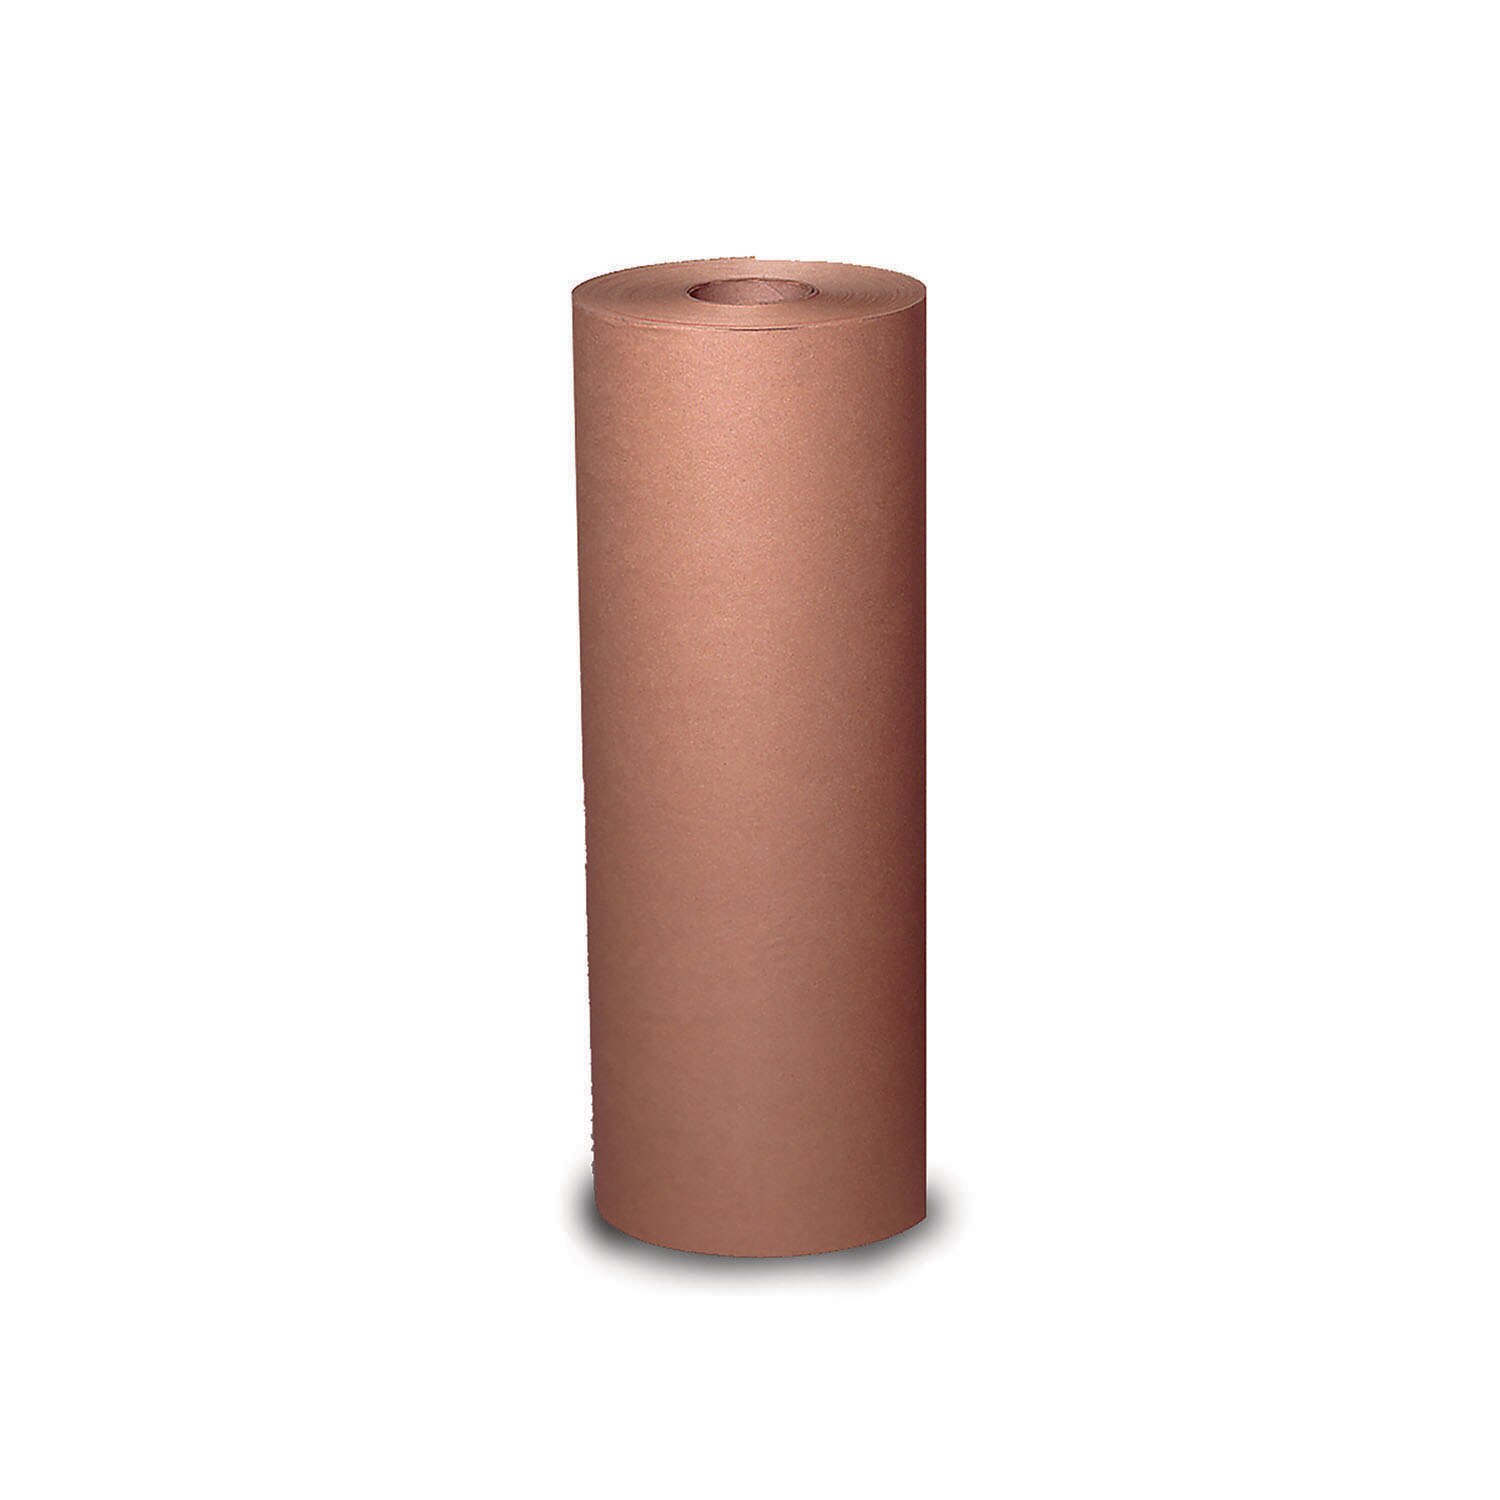 Kraft Wrapping Paper, Fire-Resistant, Recycled, 60 lb Basis Weight, 48" x 900', Brown